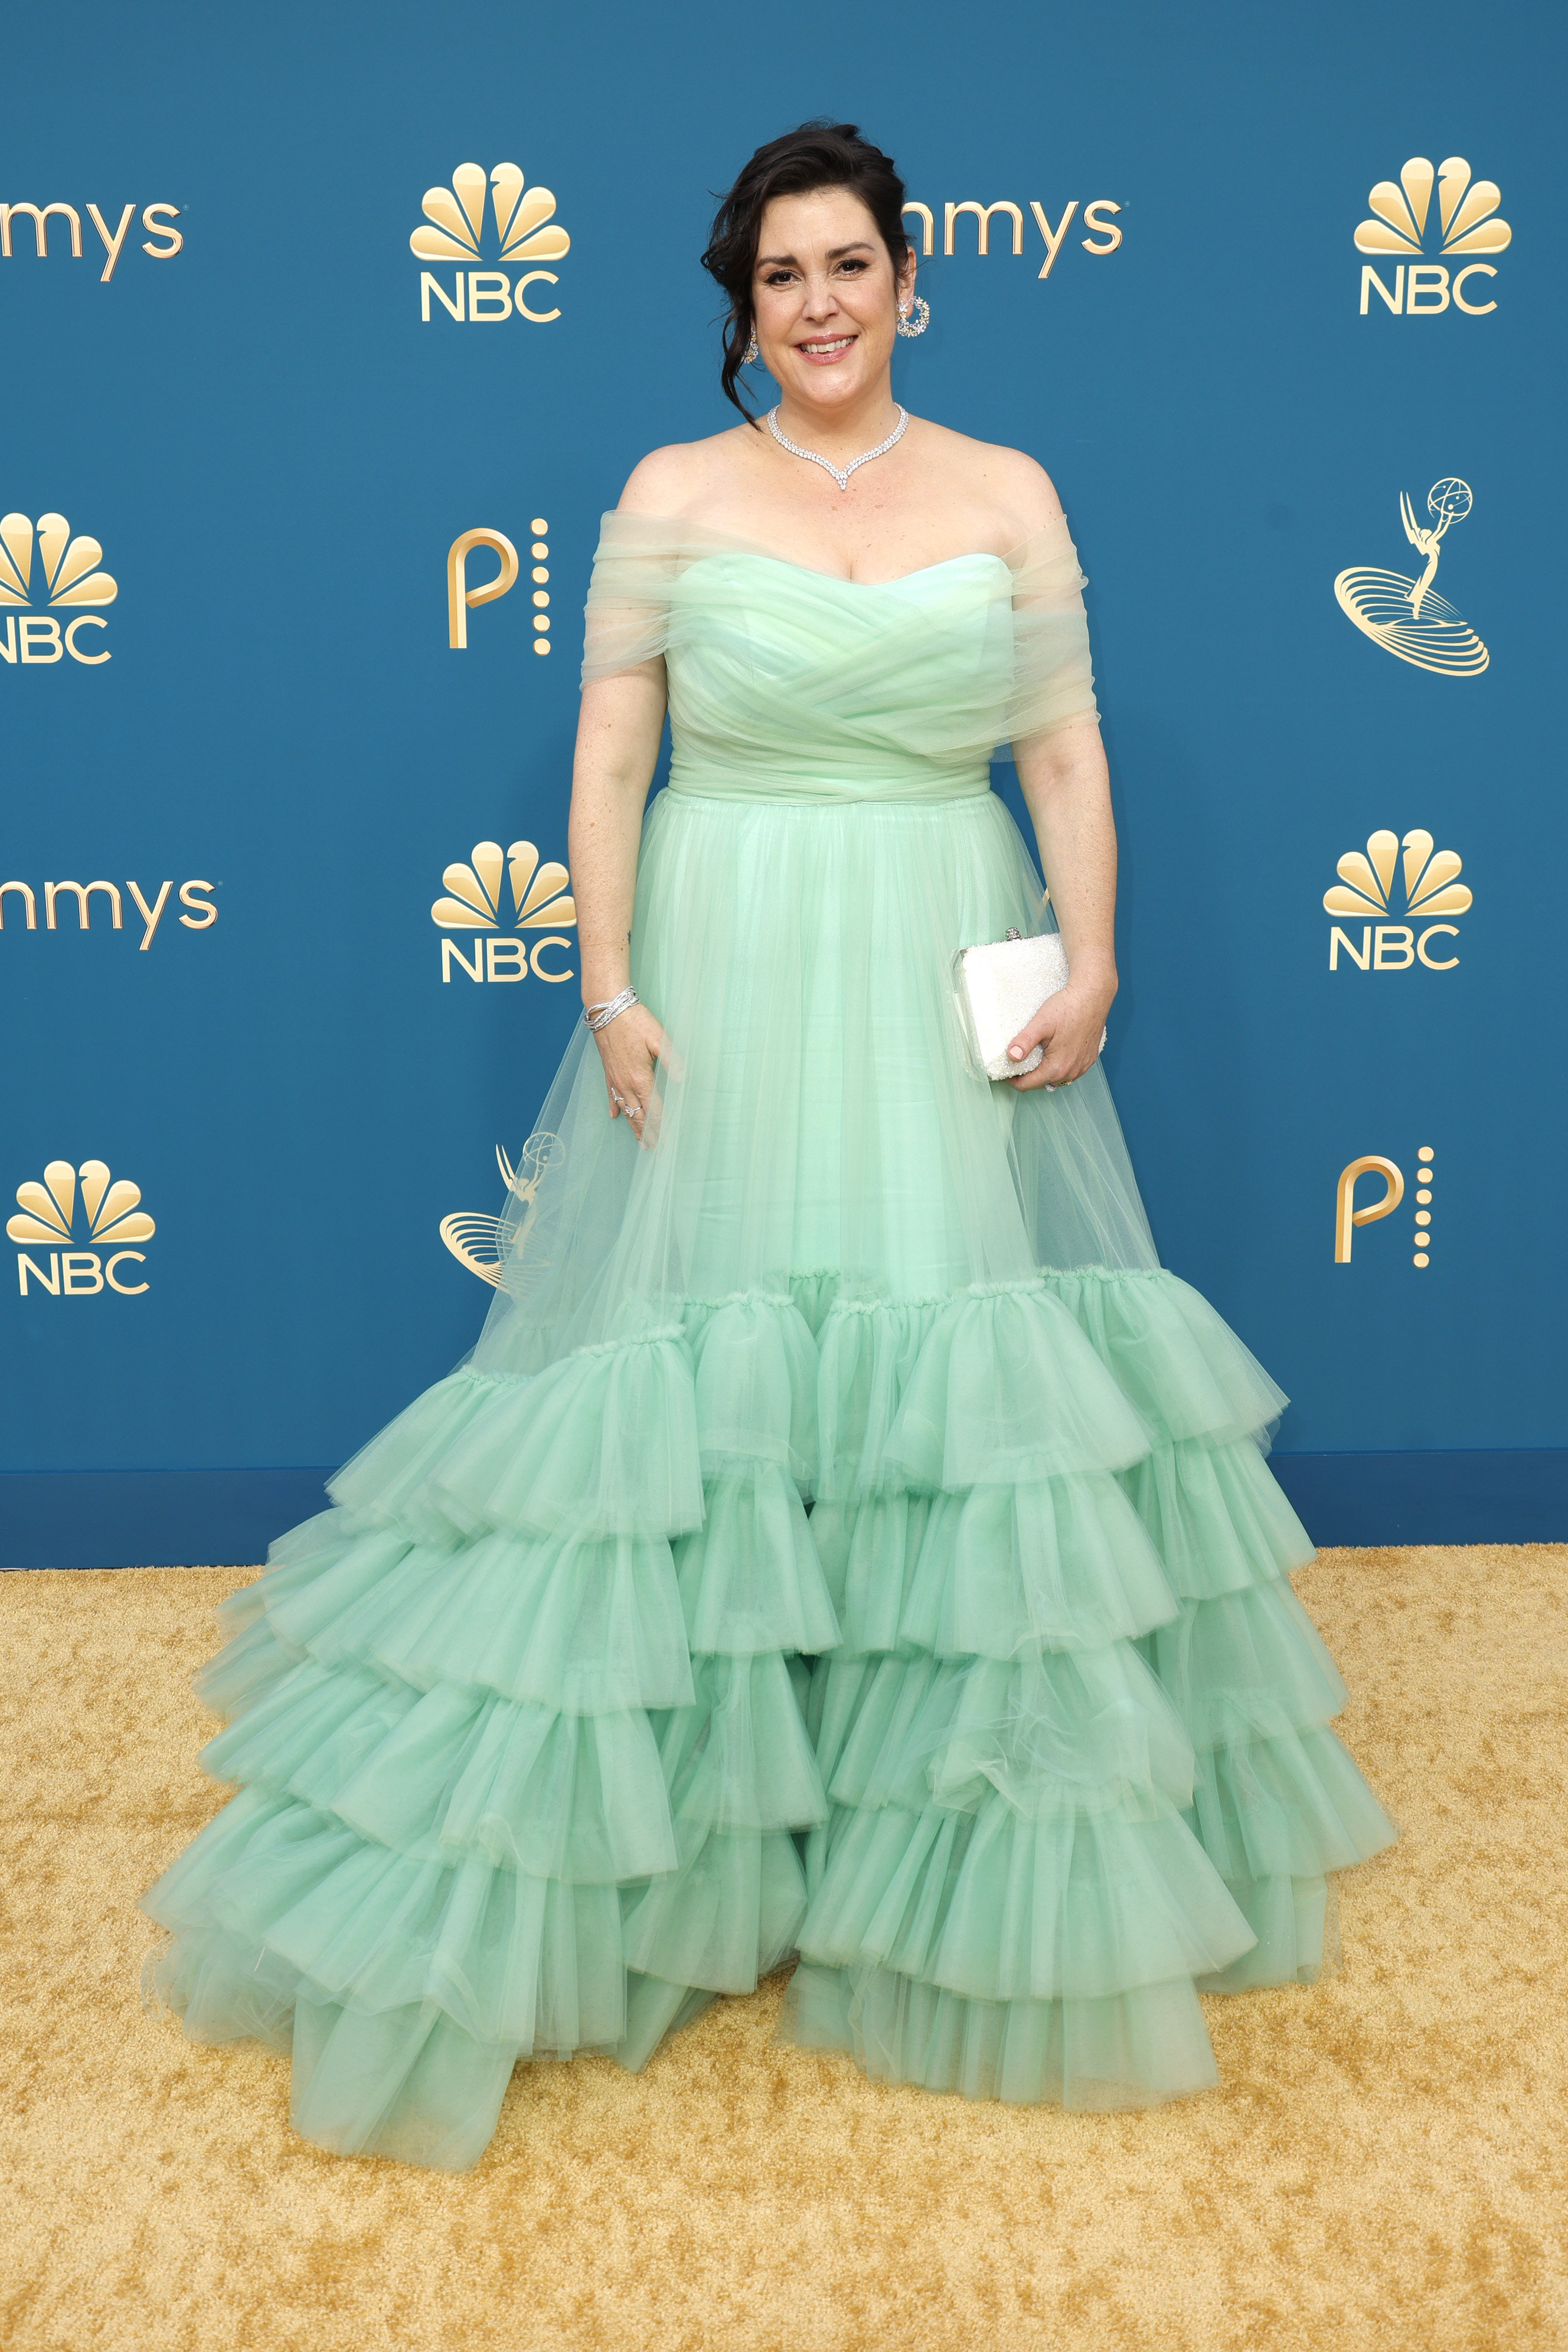 Melanie Lynskey at the 74th Primetime Emmys on September 12, 2022, in Los Angeles, California | Source: Getty Images